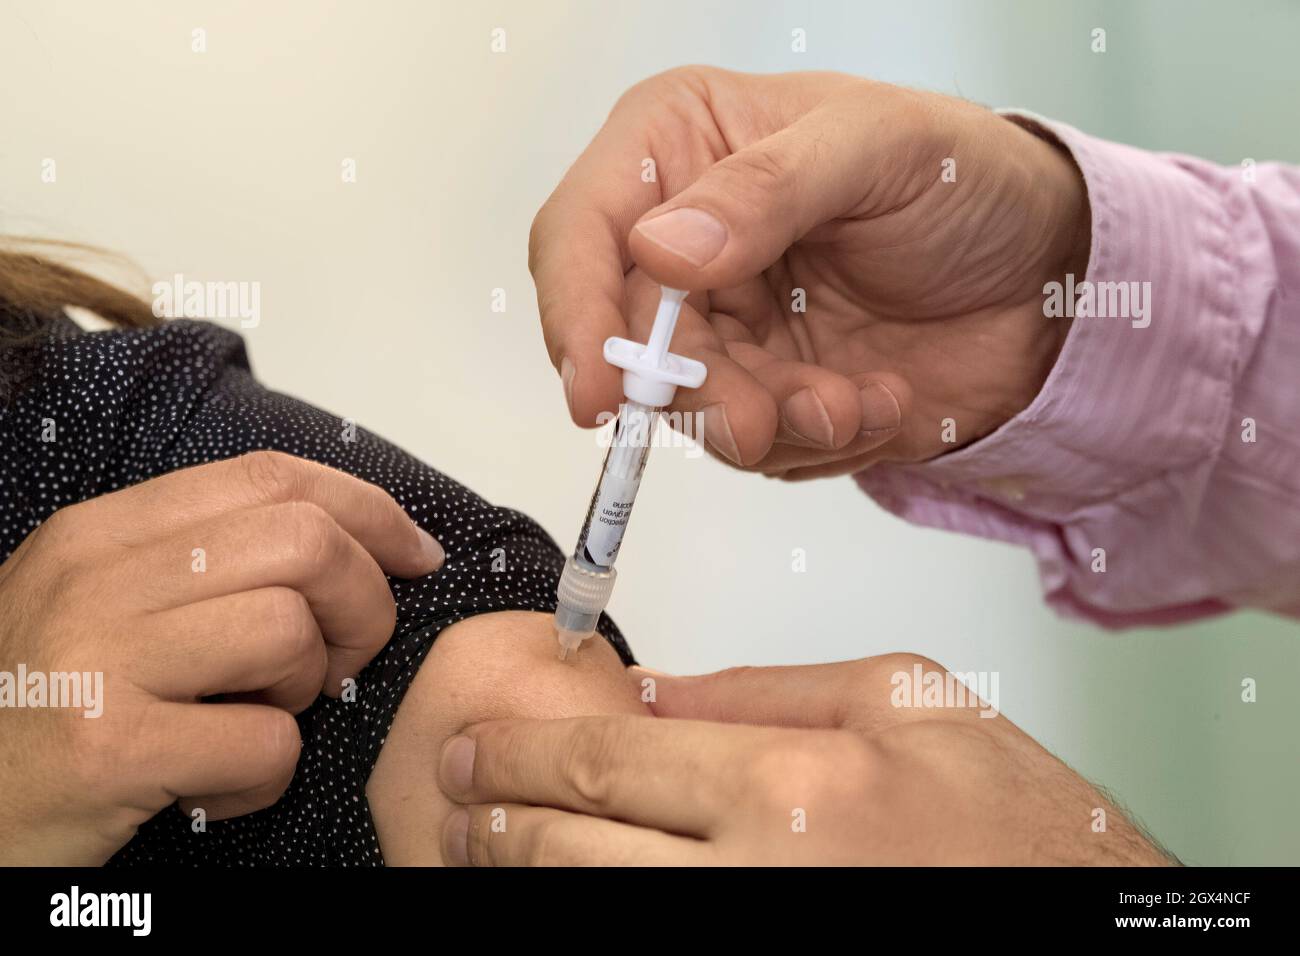 Influenza vaccination as an injection in the upper arm. Stock Photo